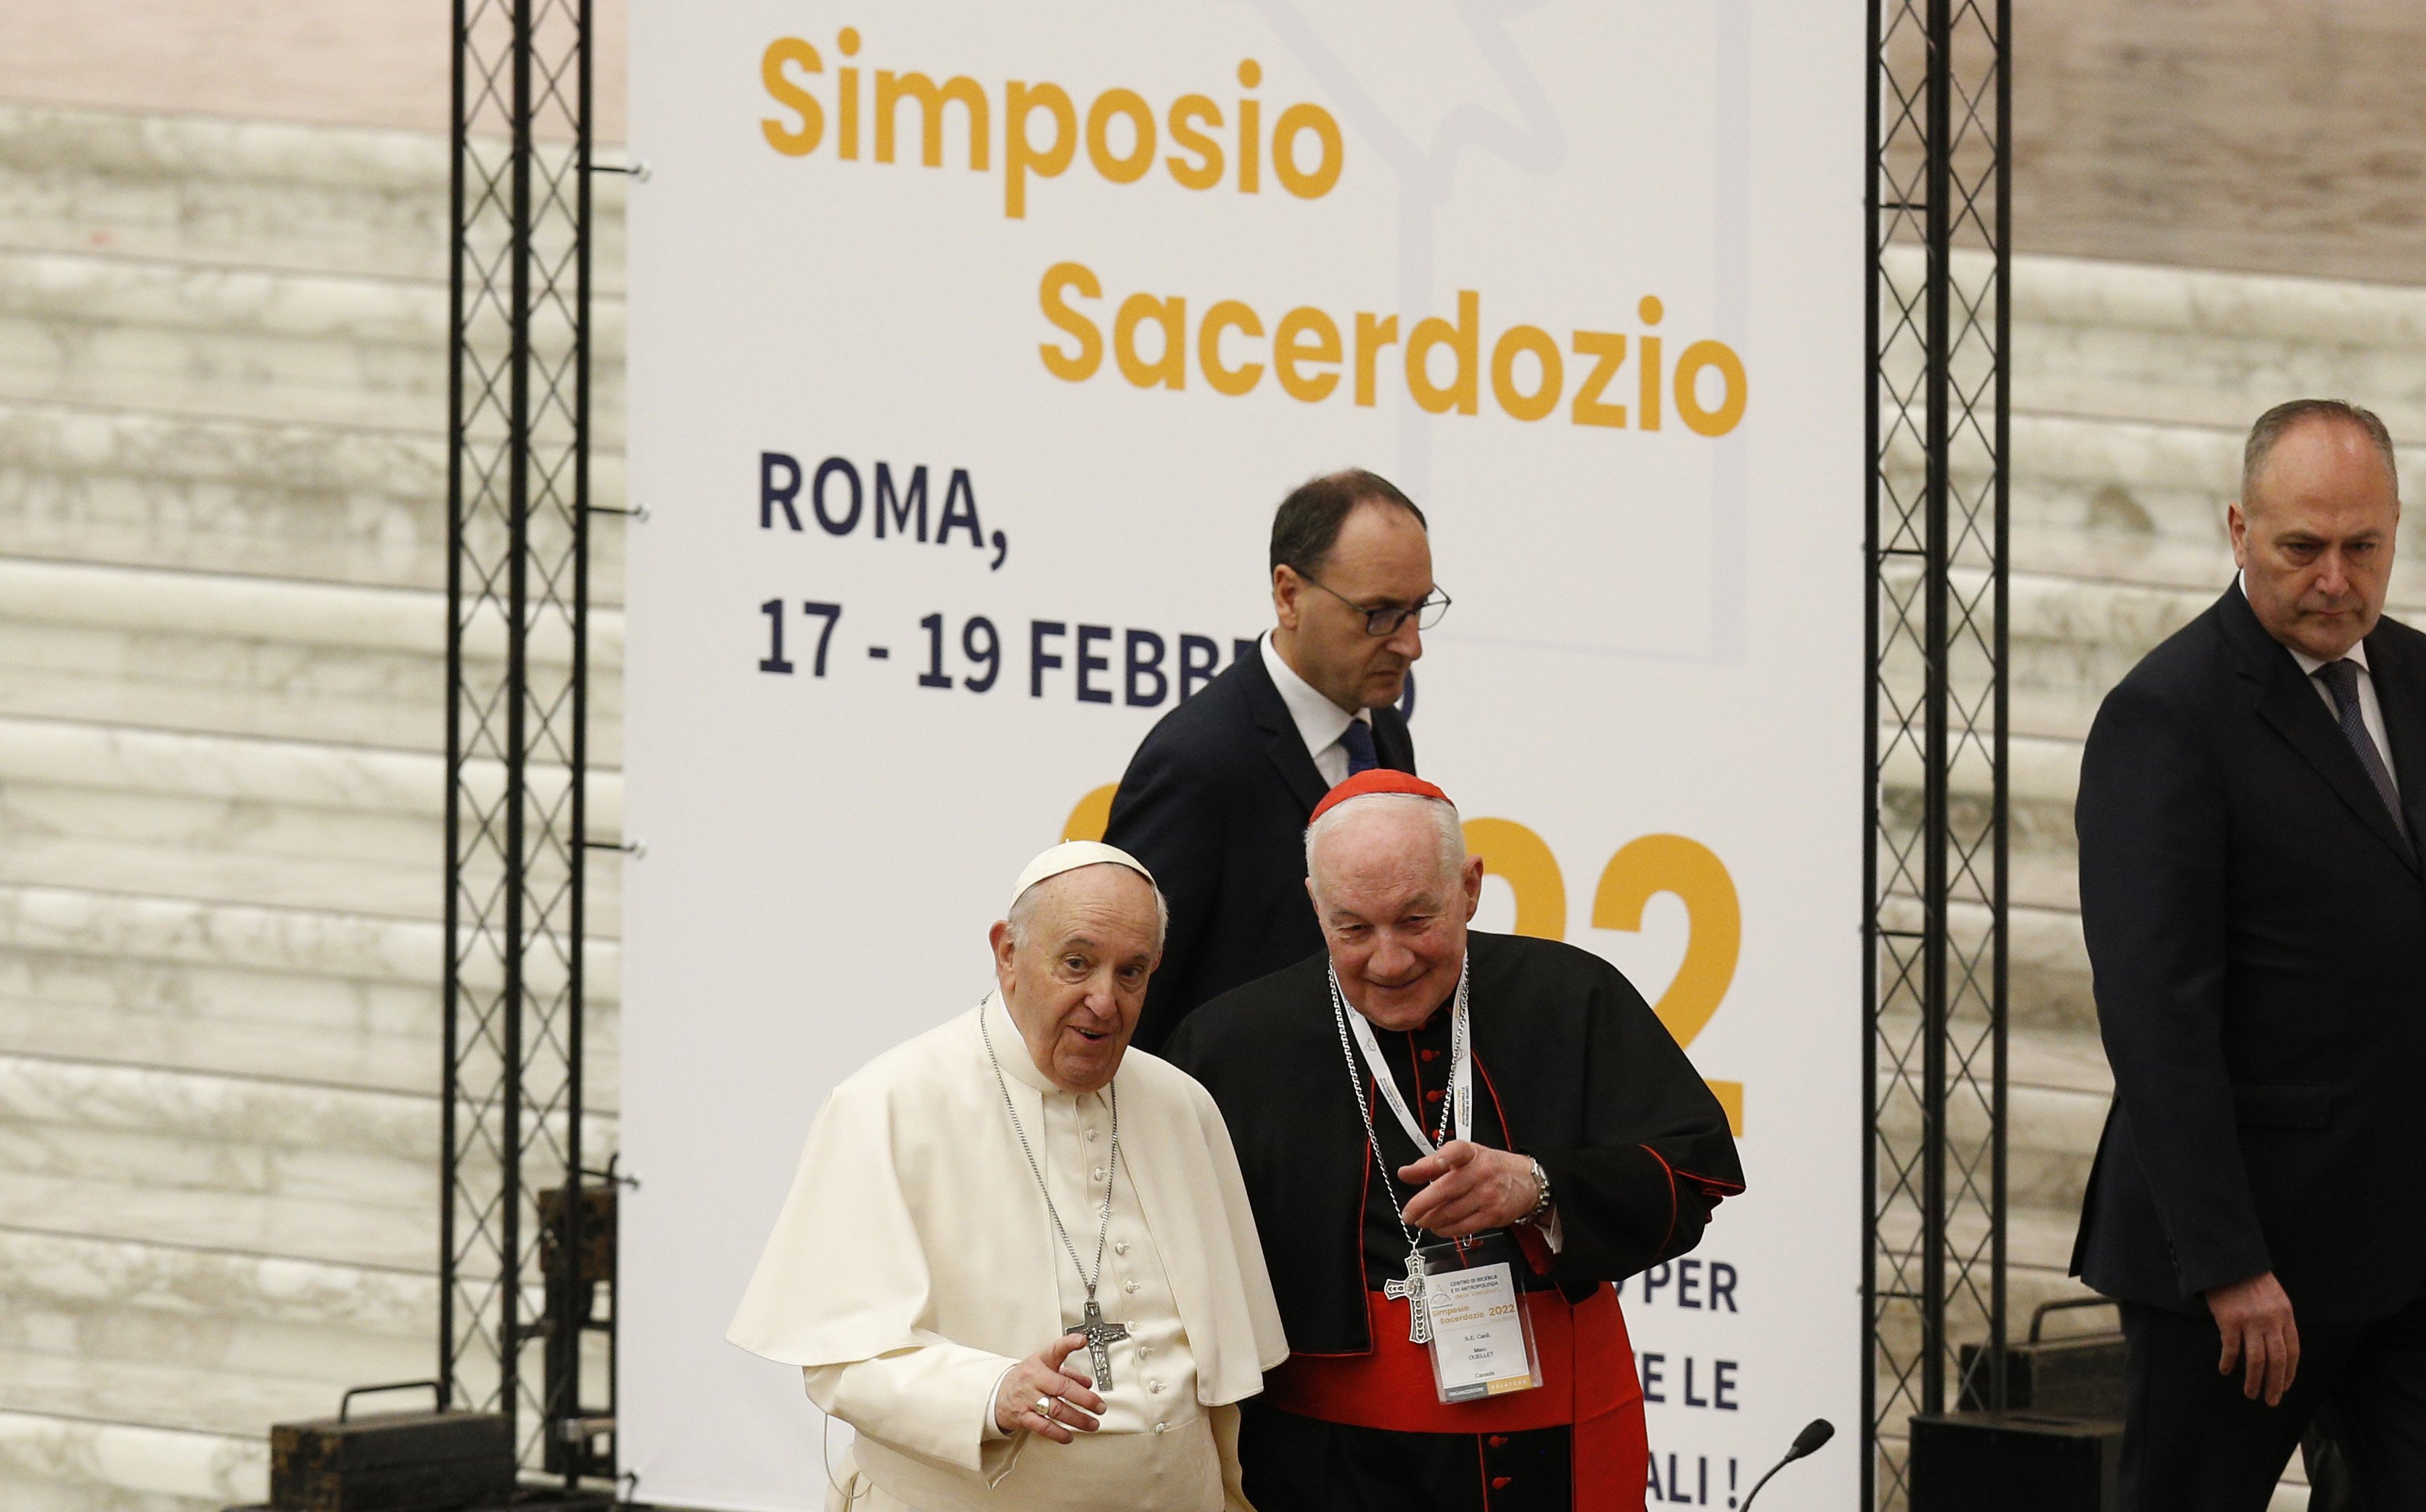 Pope Francis opens Vatican priesthood conference by upholding celibacy a 'gift' National Catholic Reporter